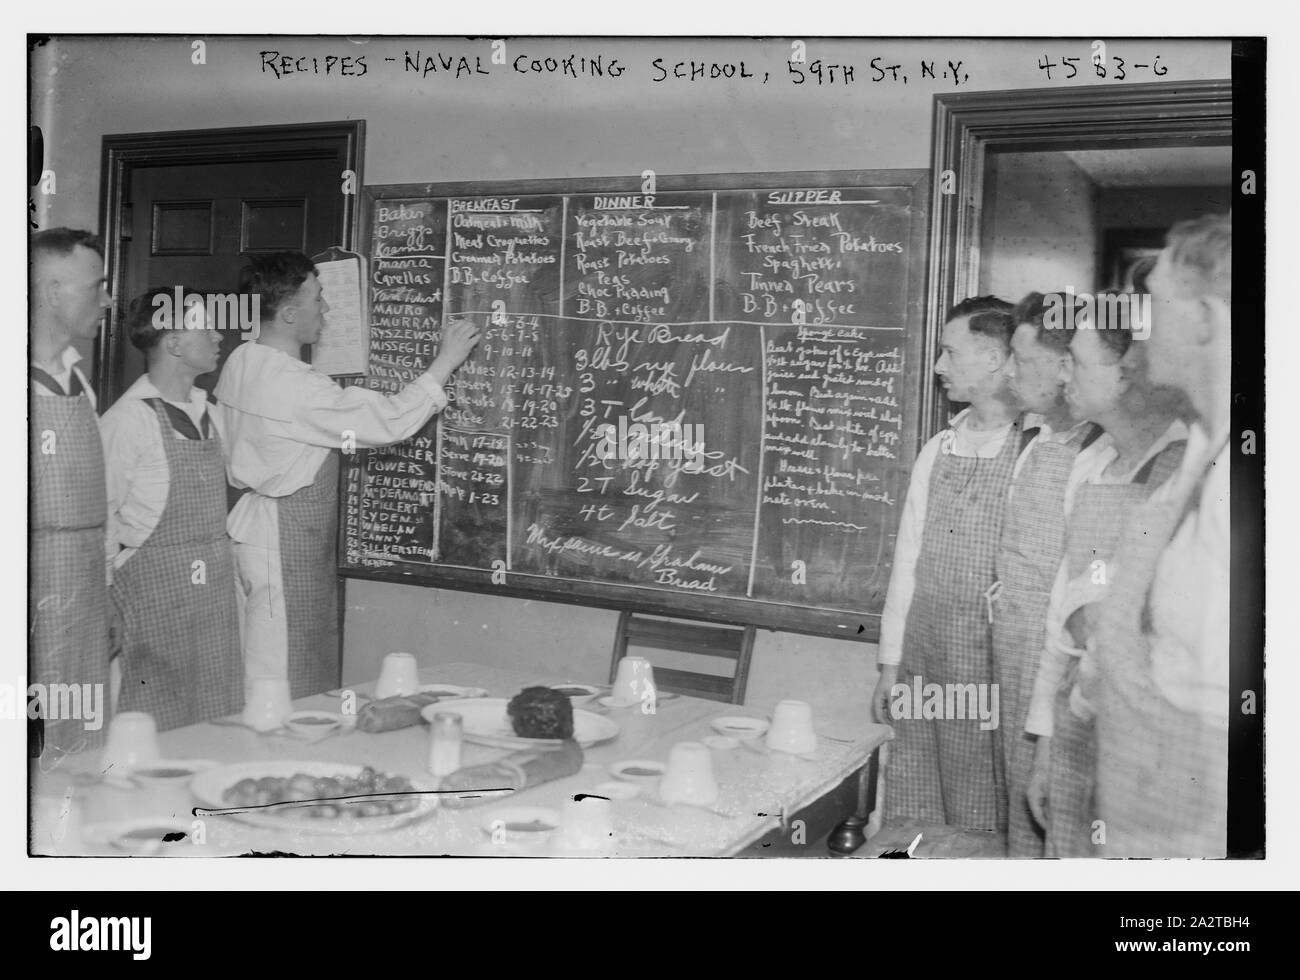 Recipes -- Naval cooking school, 59th St. N.Y. Stock Photo